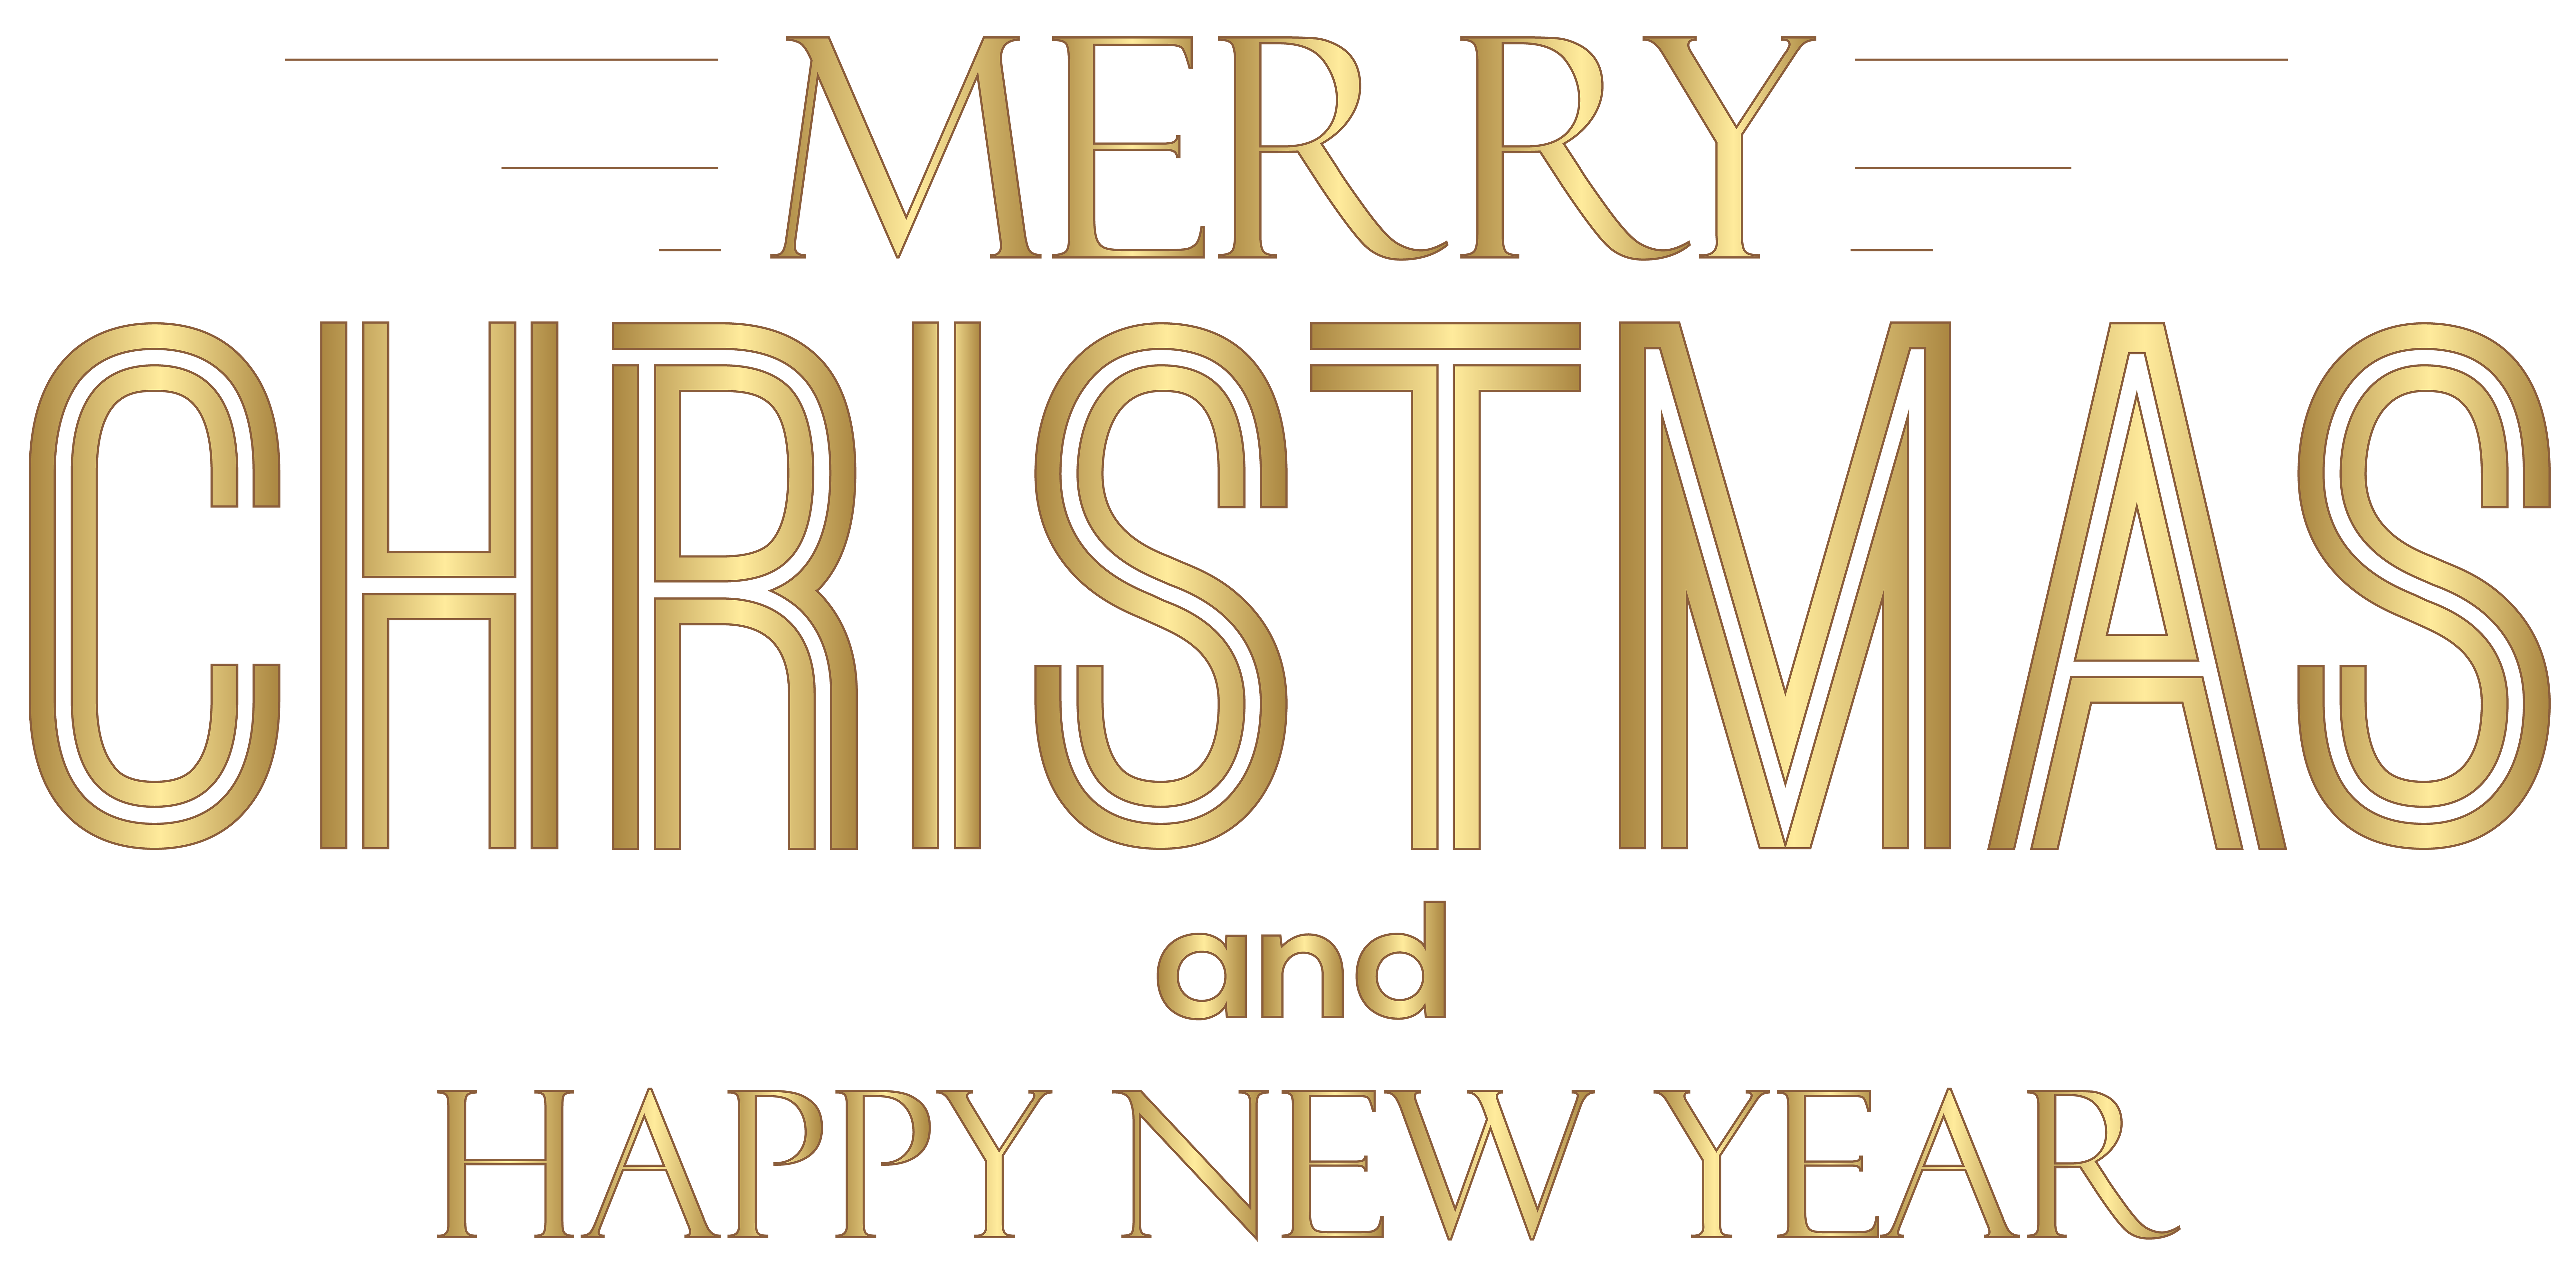 merry-christmas-and-happy-new-year-text-png-clip-art-gallery-yopriceville-high-quality-free